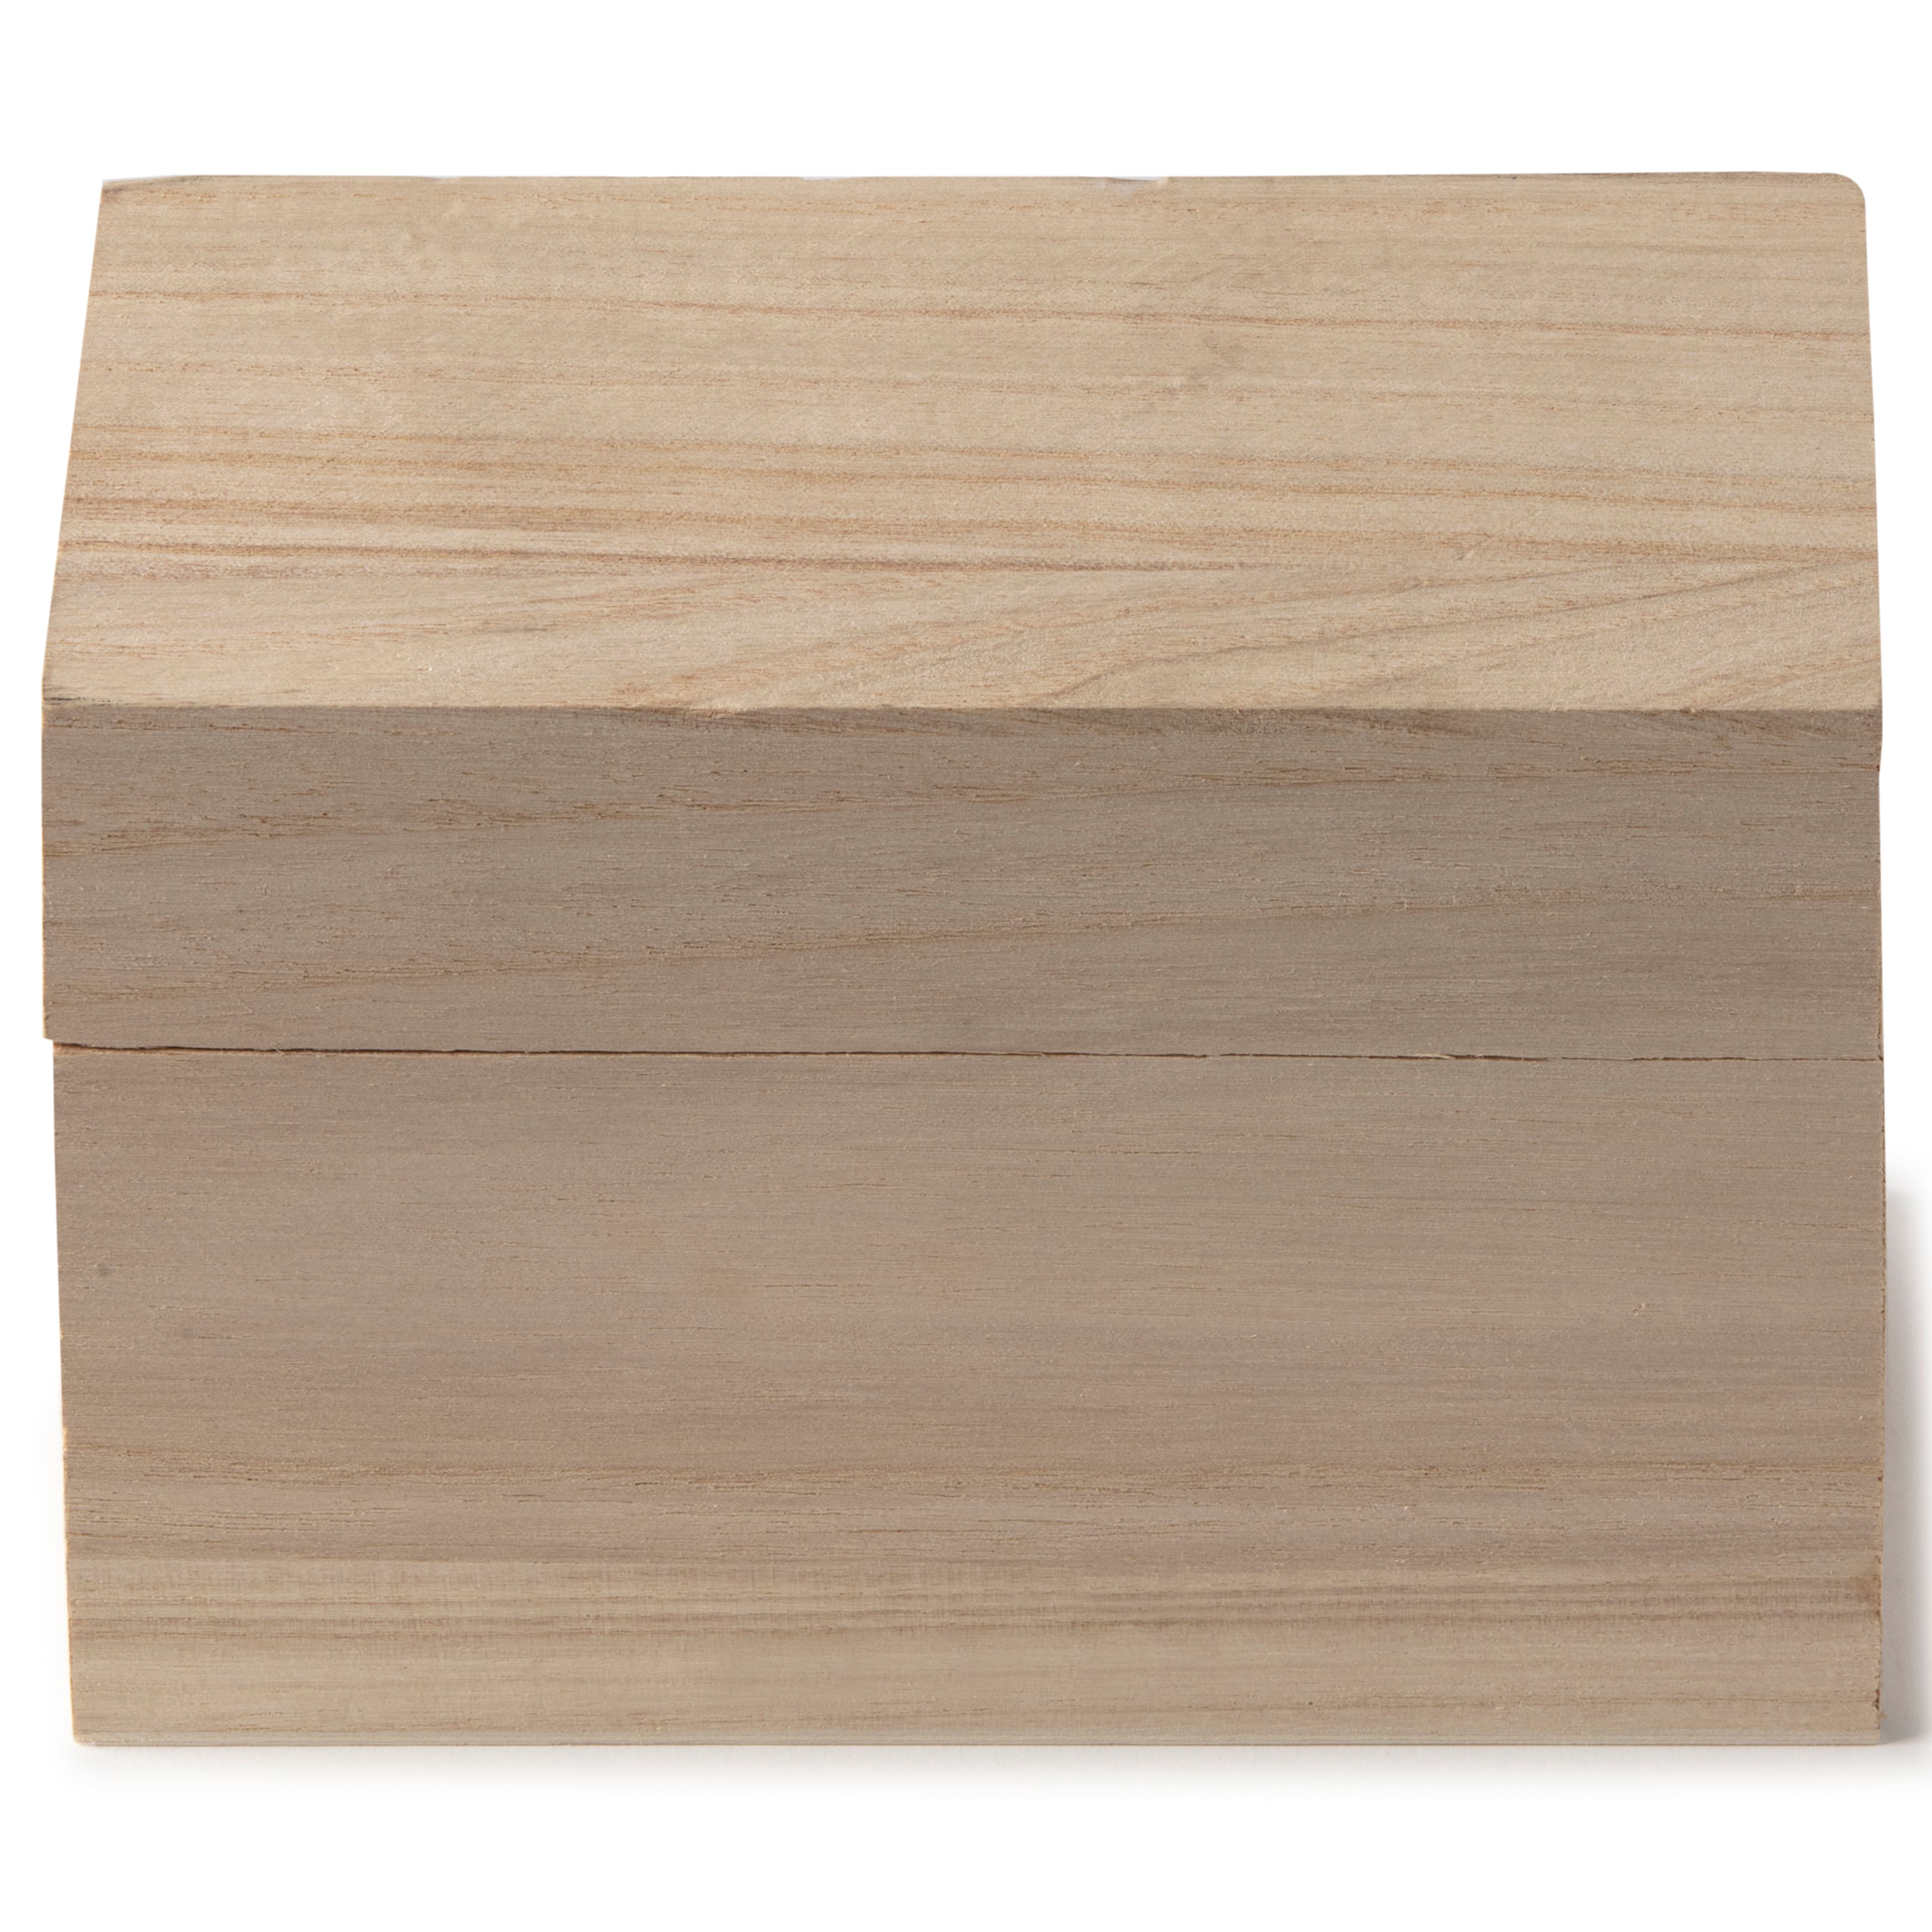 ArtMinds 1 Square Wood Blocks - 1 in